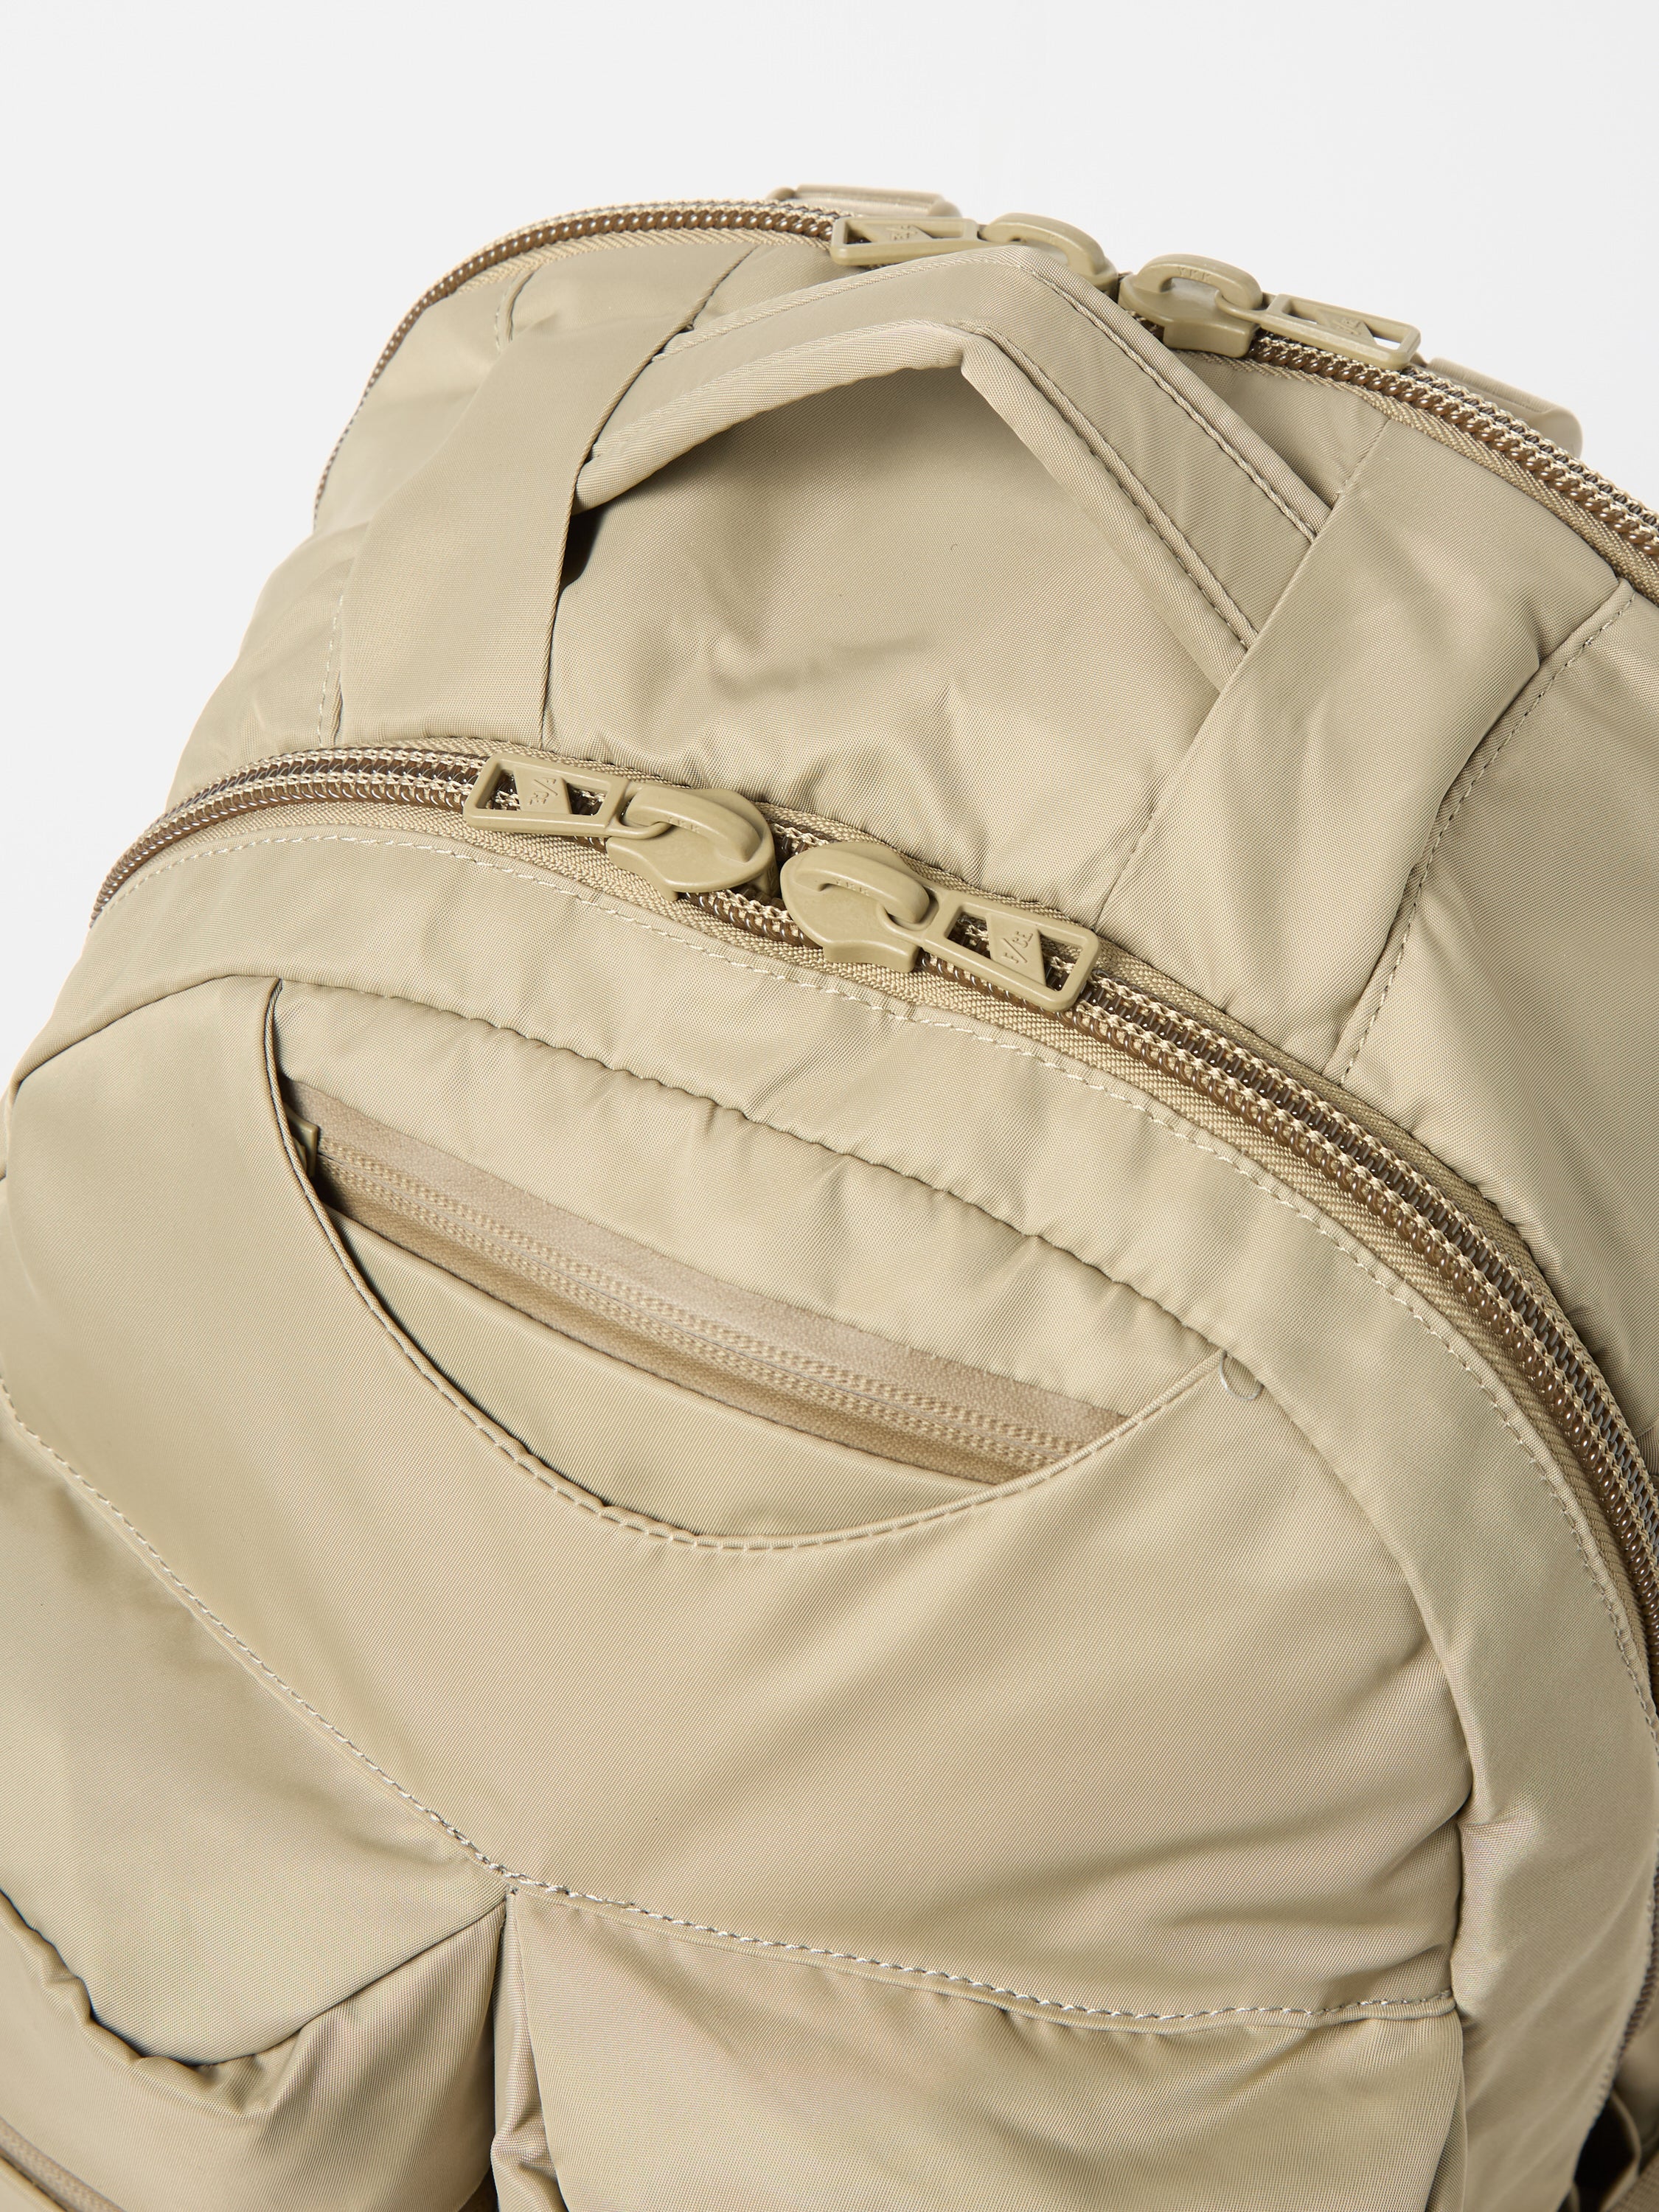 F/CE.® Urban Town Bag in Sage Green Recycled Twill Nylon